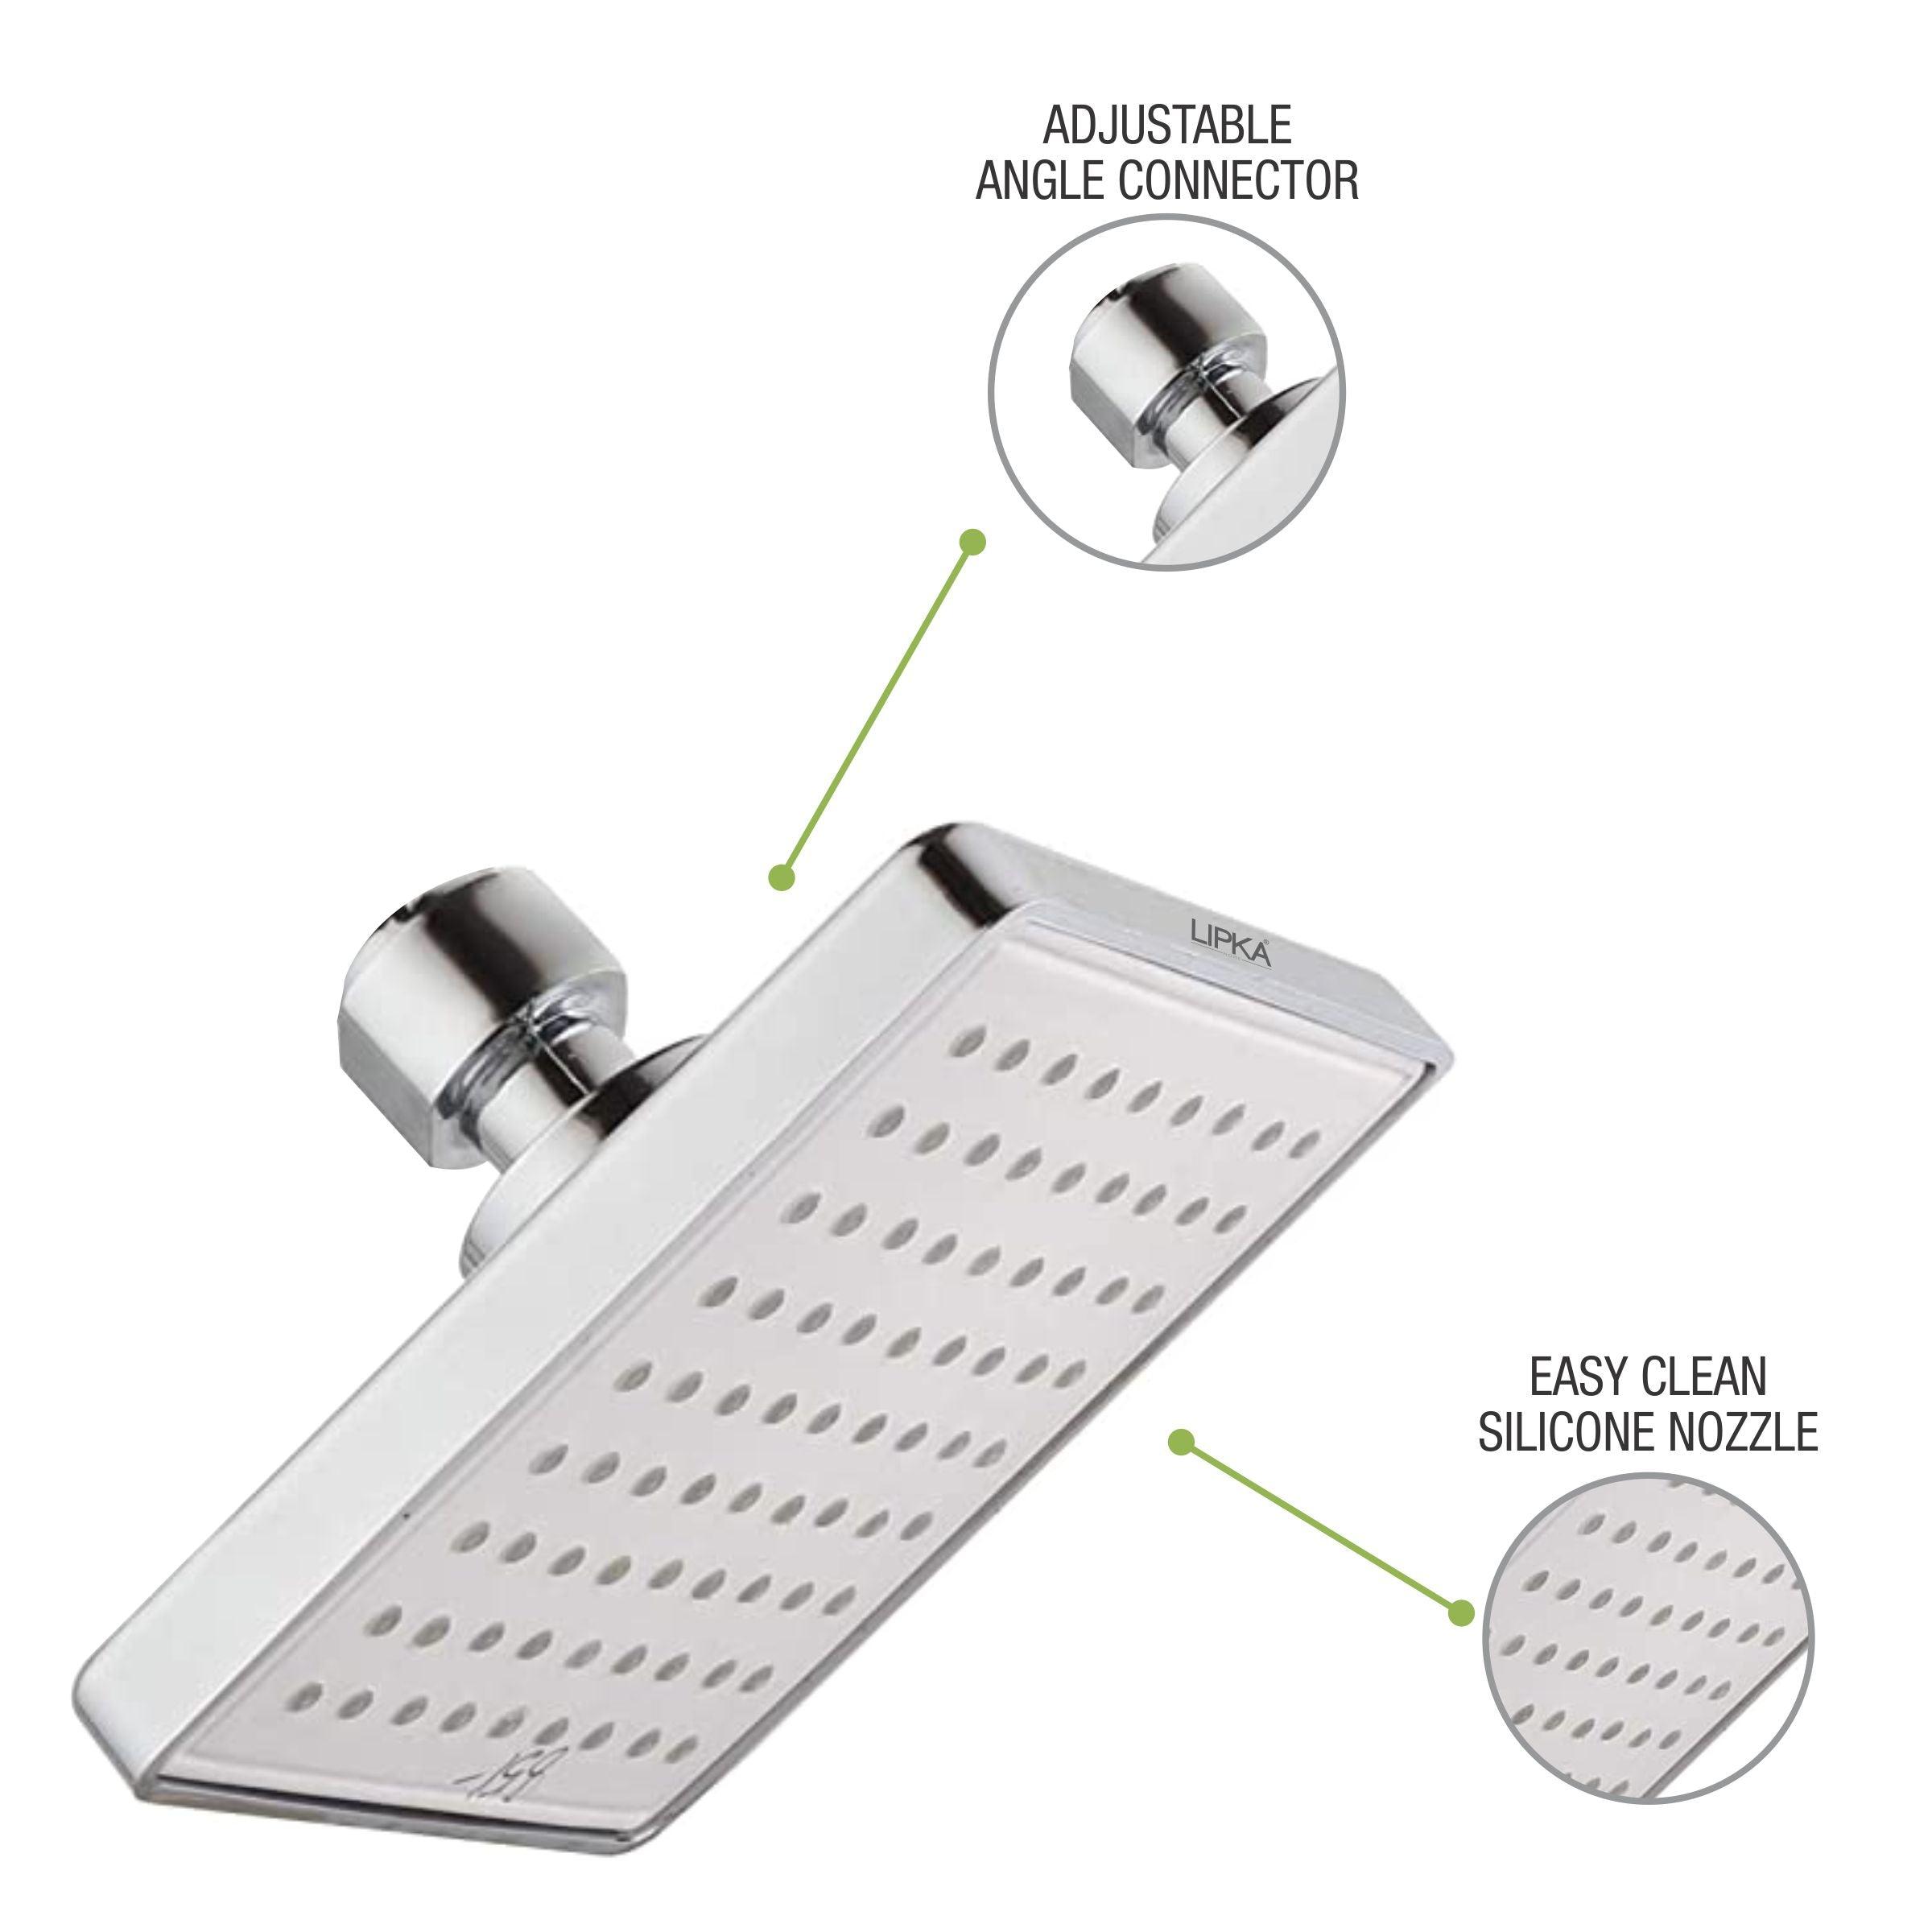 Pro Overhead Shower (4 x 4 Inches) features